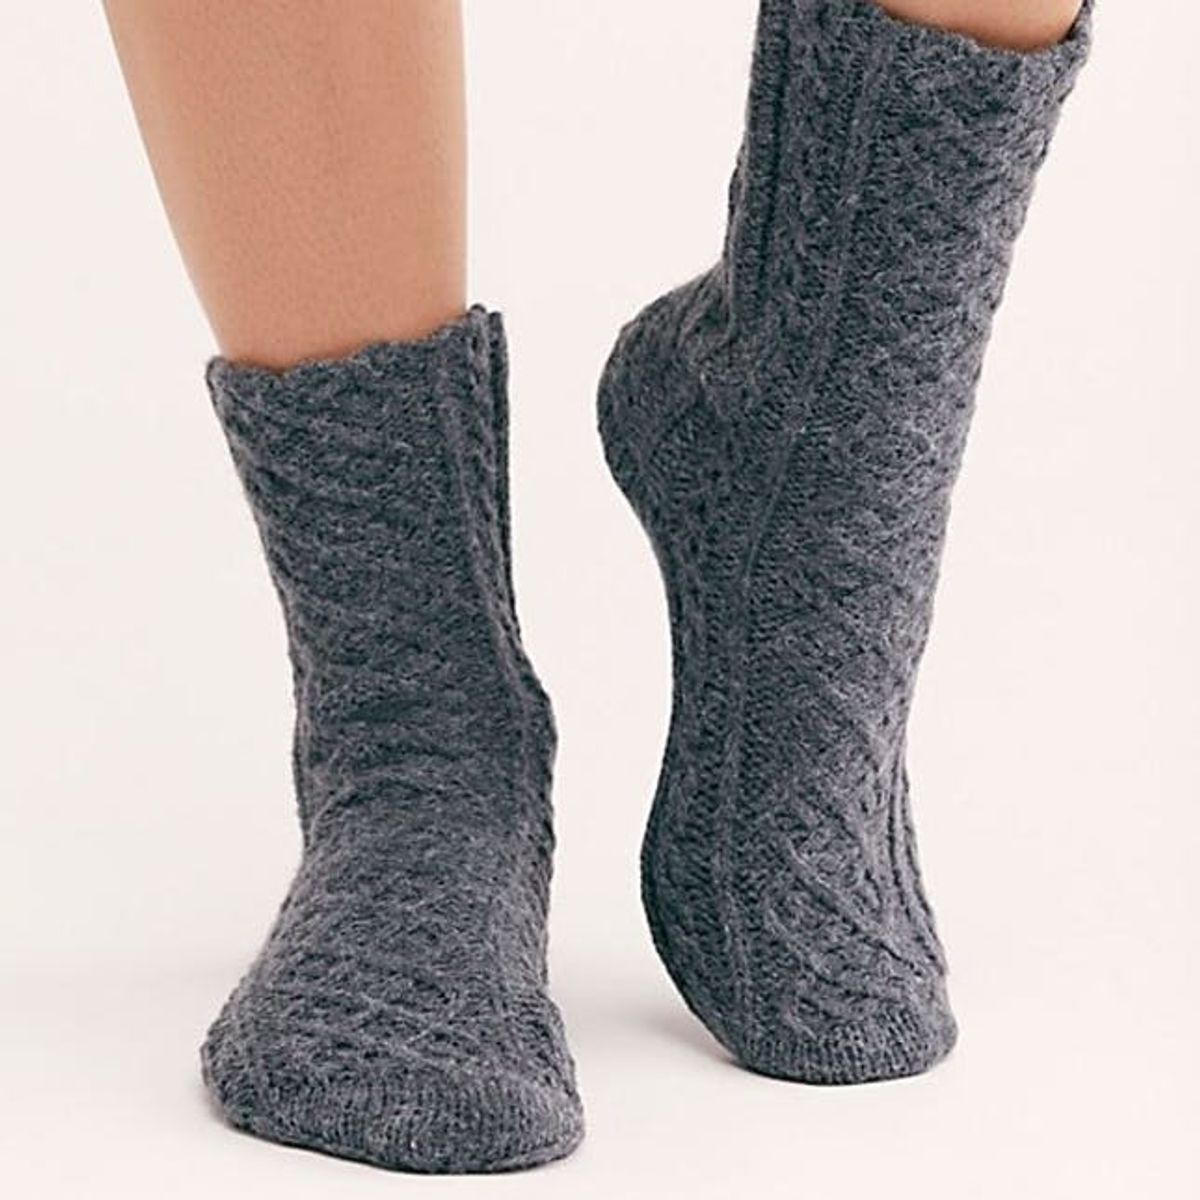 11 Pairs of Insanely Cozy Socks to Keep You Warm All Winter